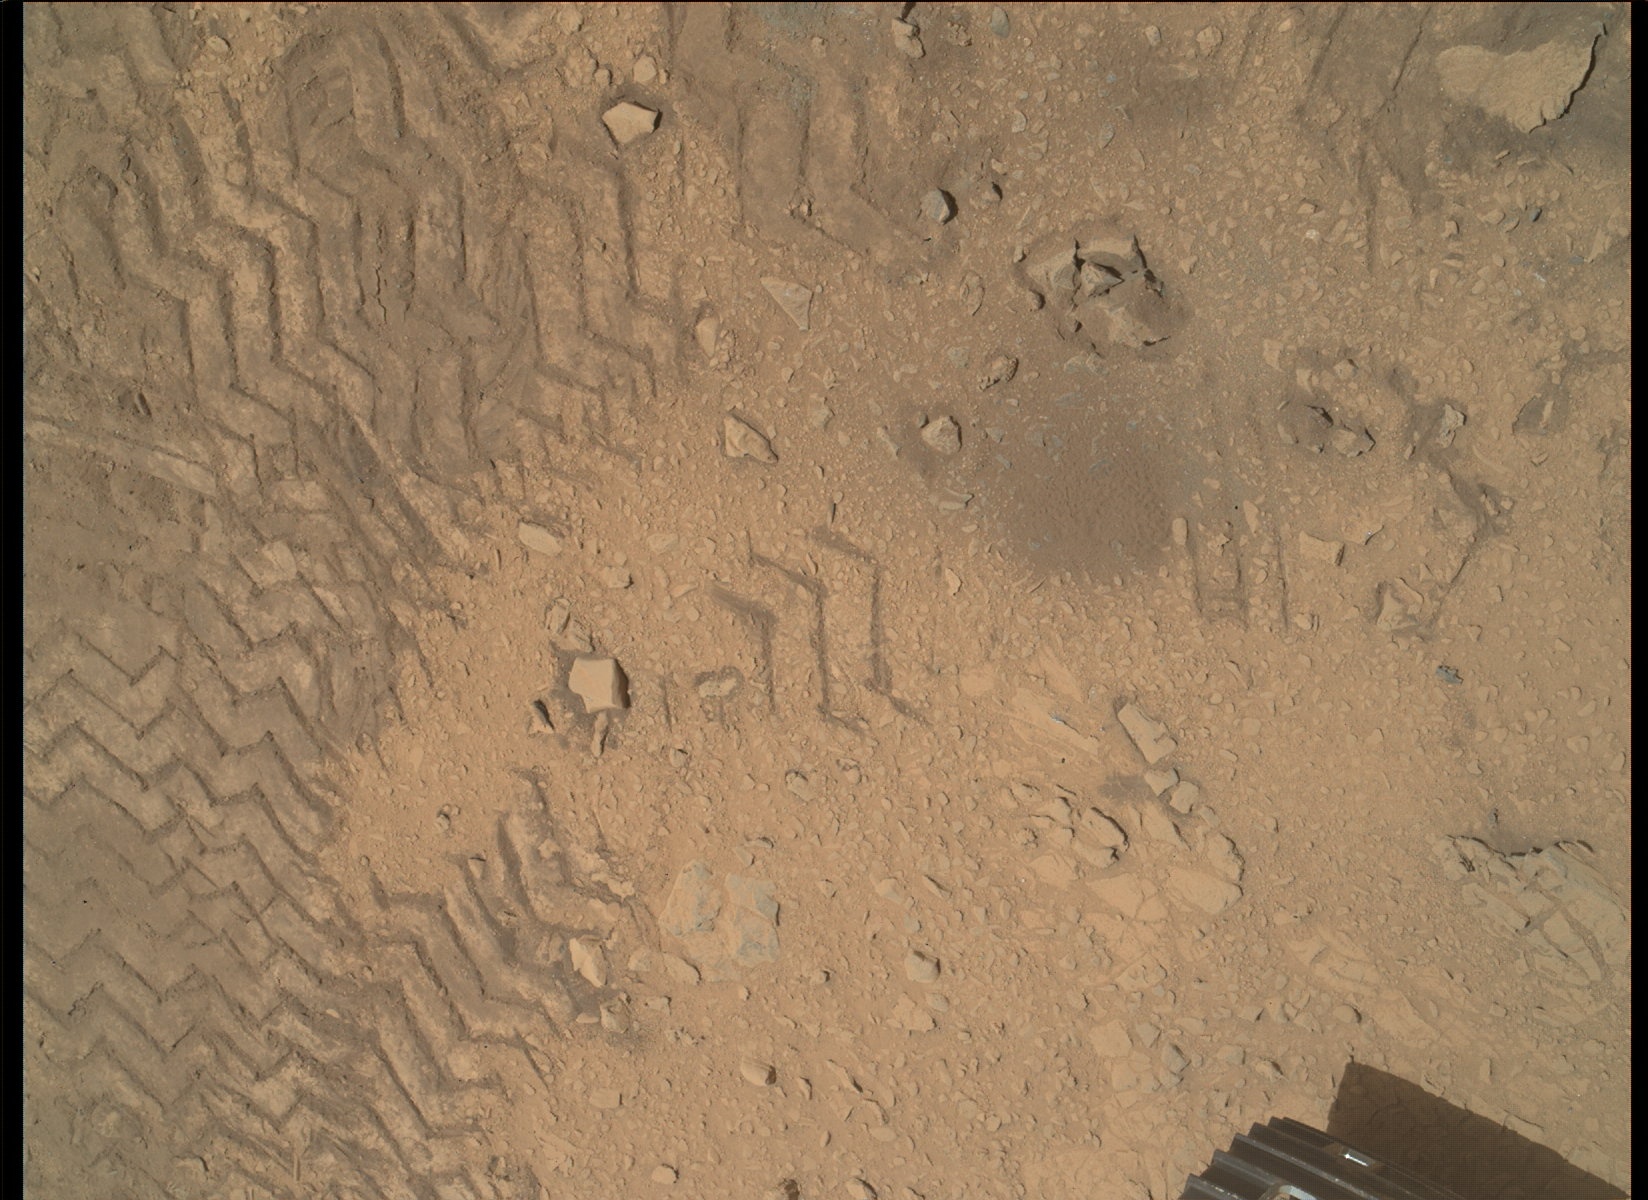 Nasa's Mars rover Curiosity acquired this image using its Mars Hand Lens Imager (MAHLI) on Sol 84